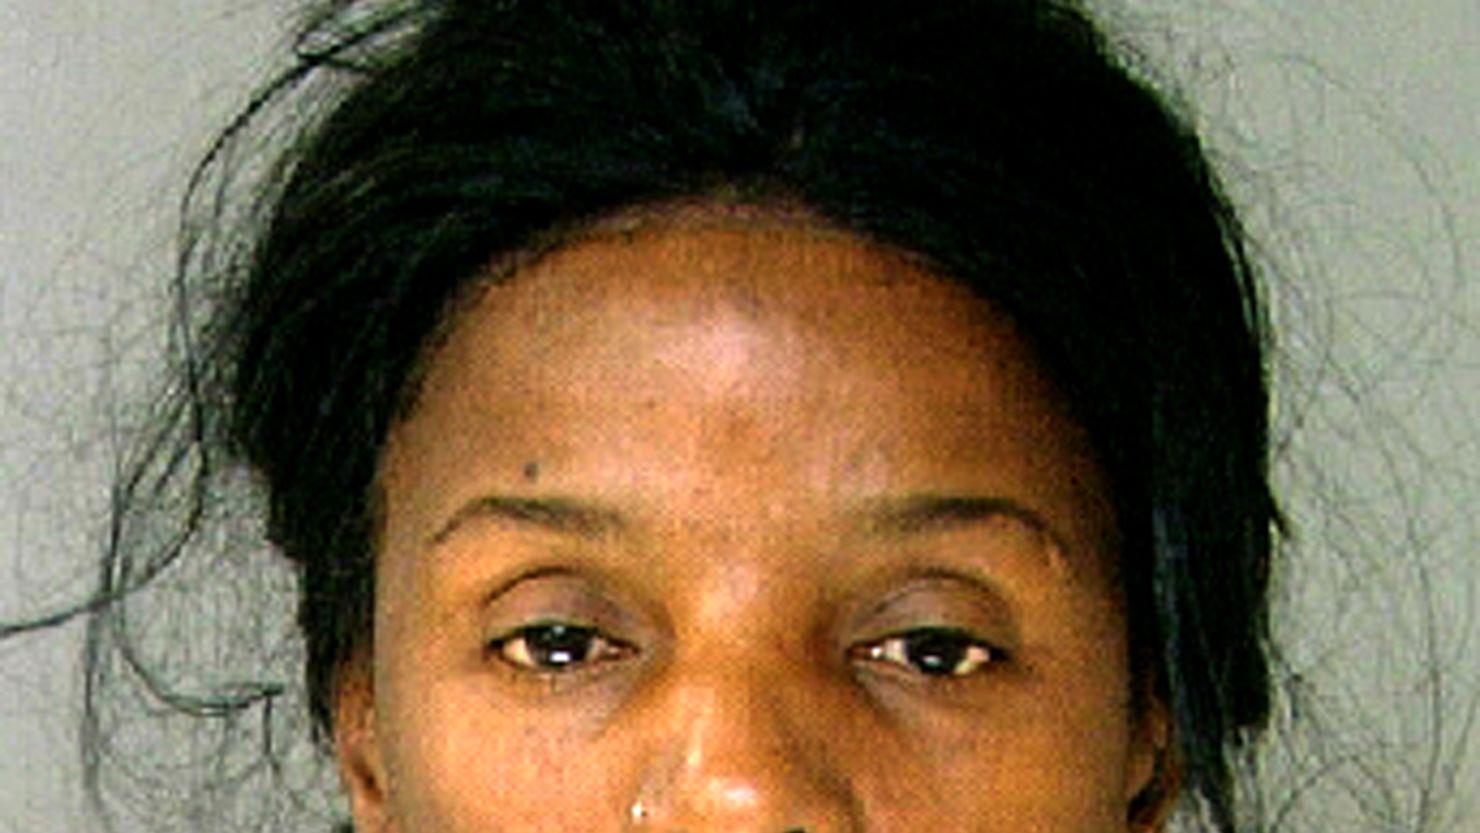 Linda Ann Weston, 51, is accused of locking up four mentally disabled adults in a boiler room at a Philadelphia apartment.